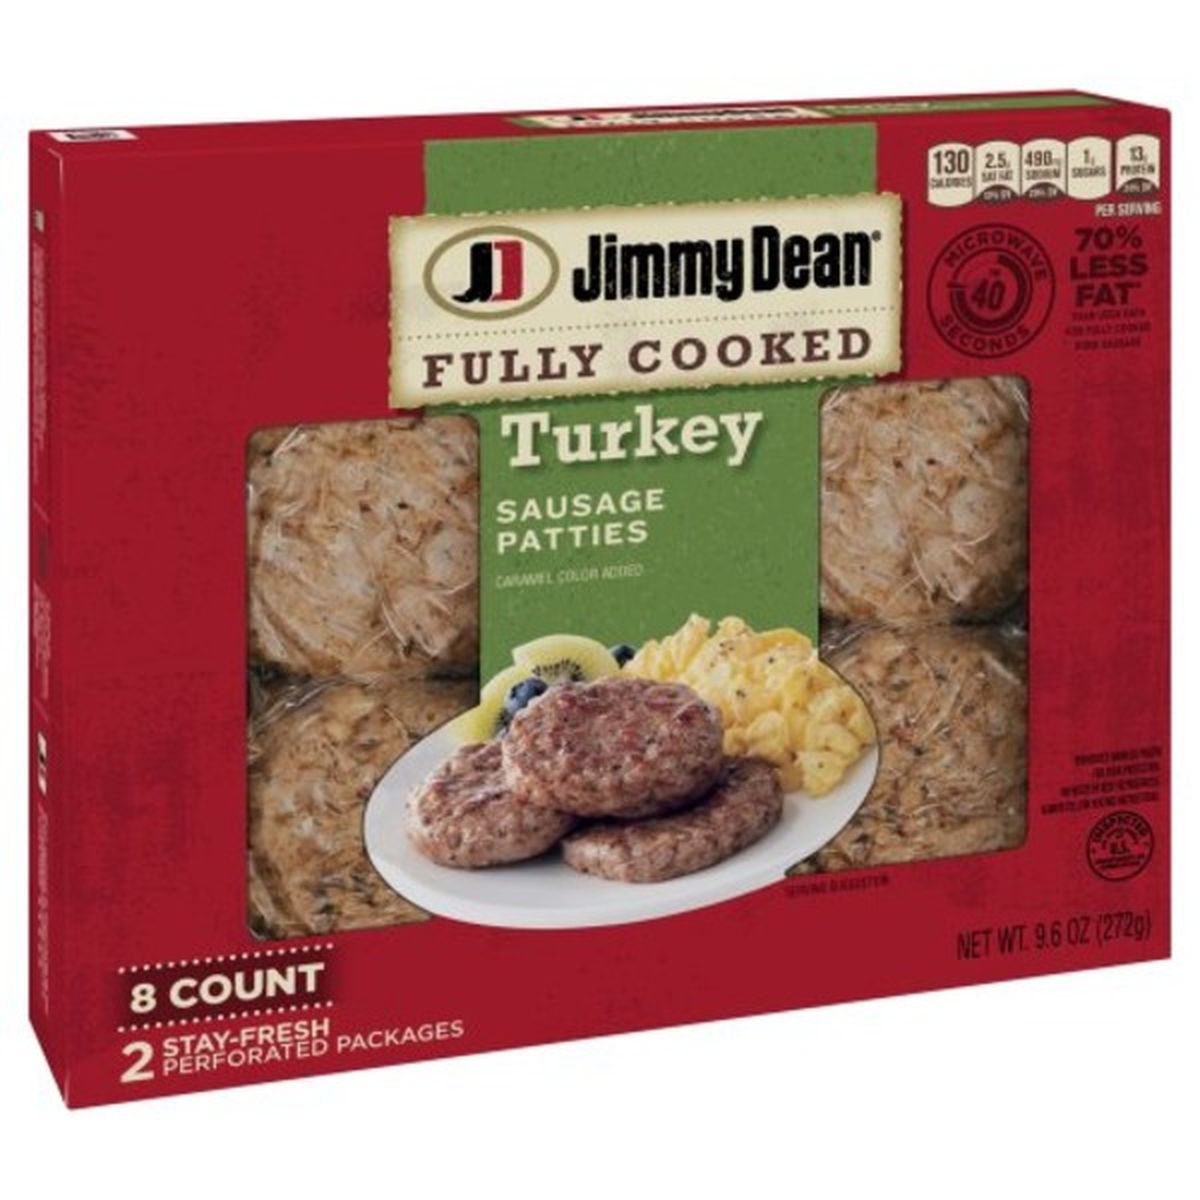 Calories in Jimmy Dean Fully Cooked Turkey Sausage Patties